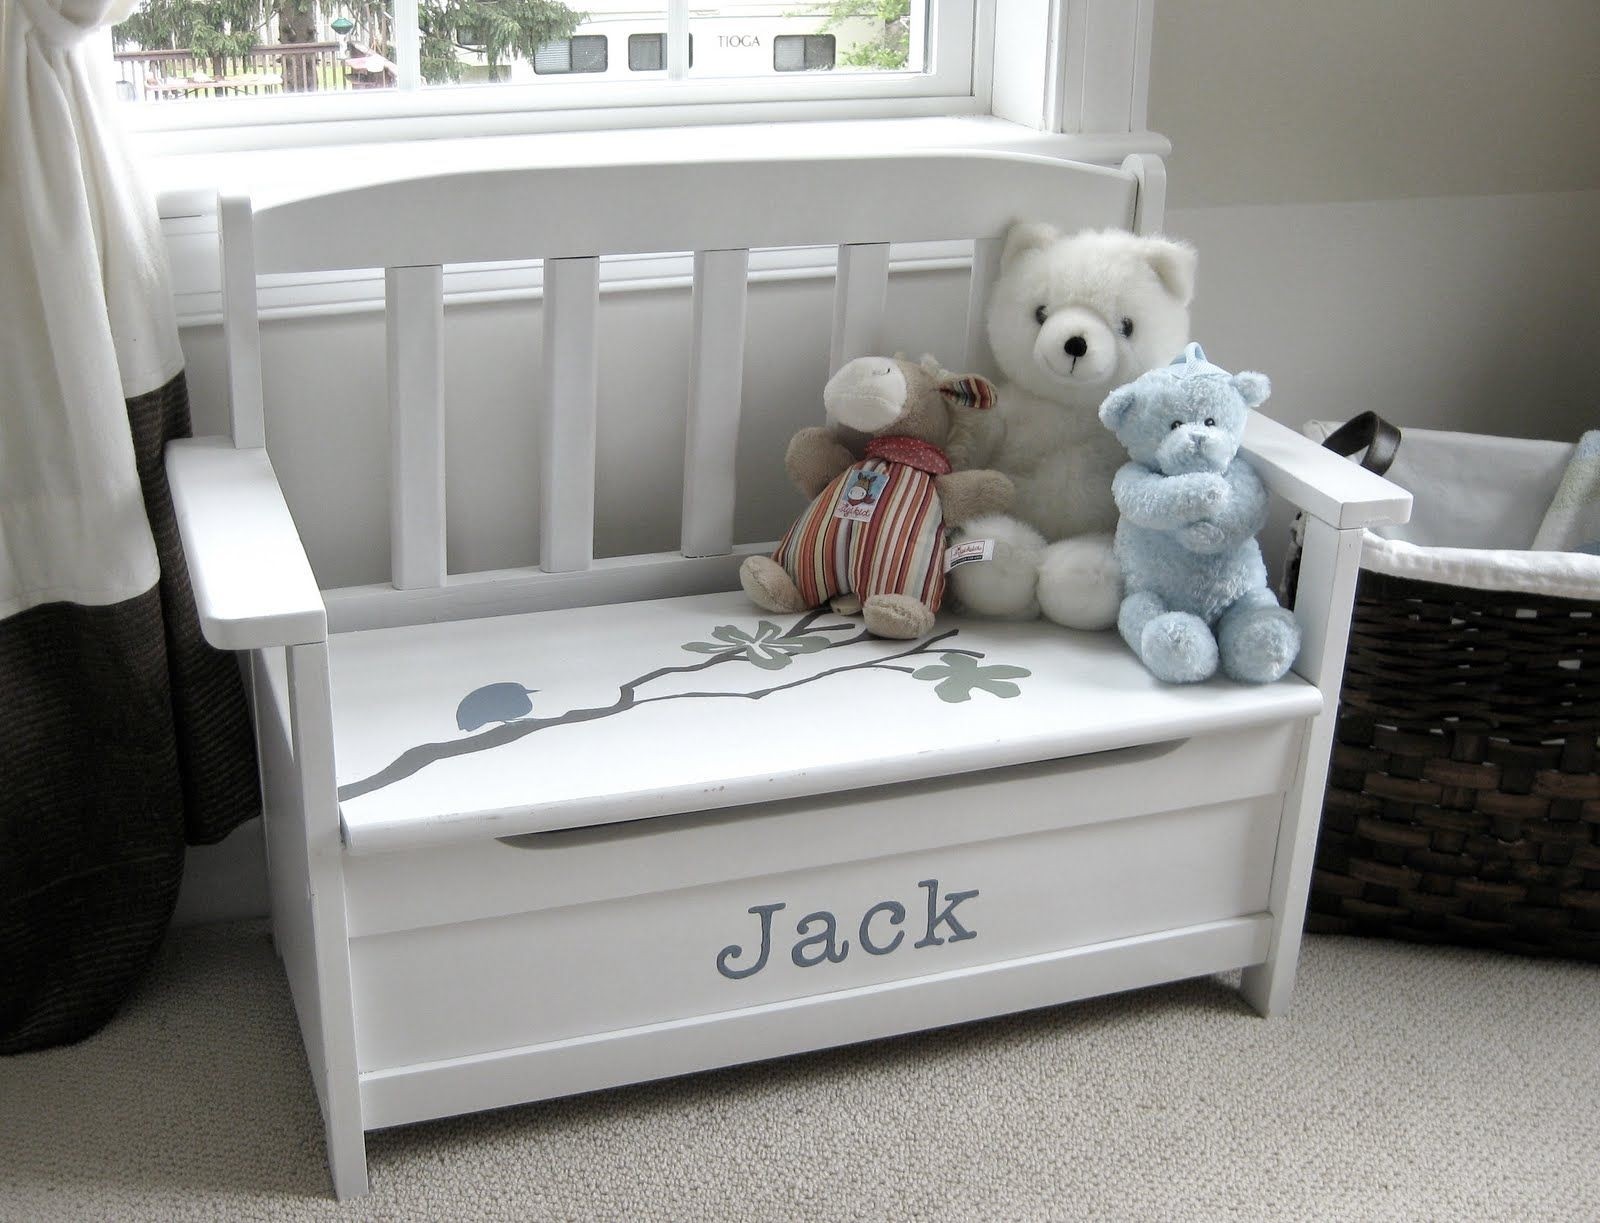 Personalized toy chest bench